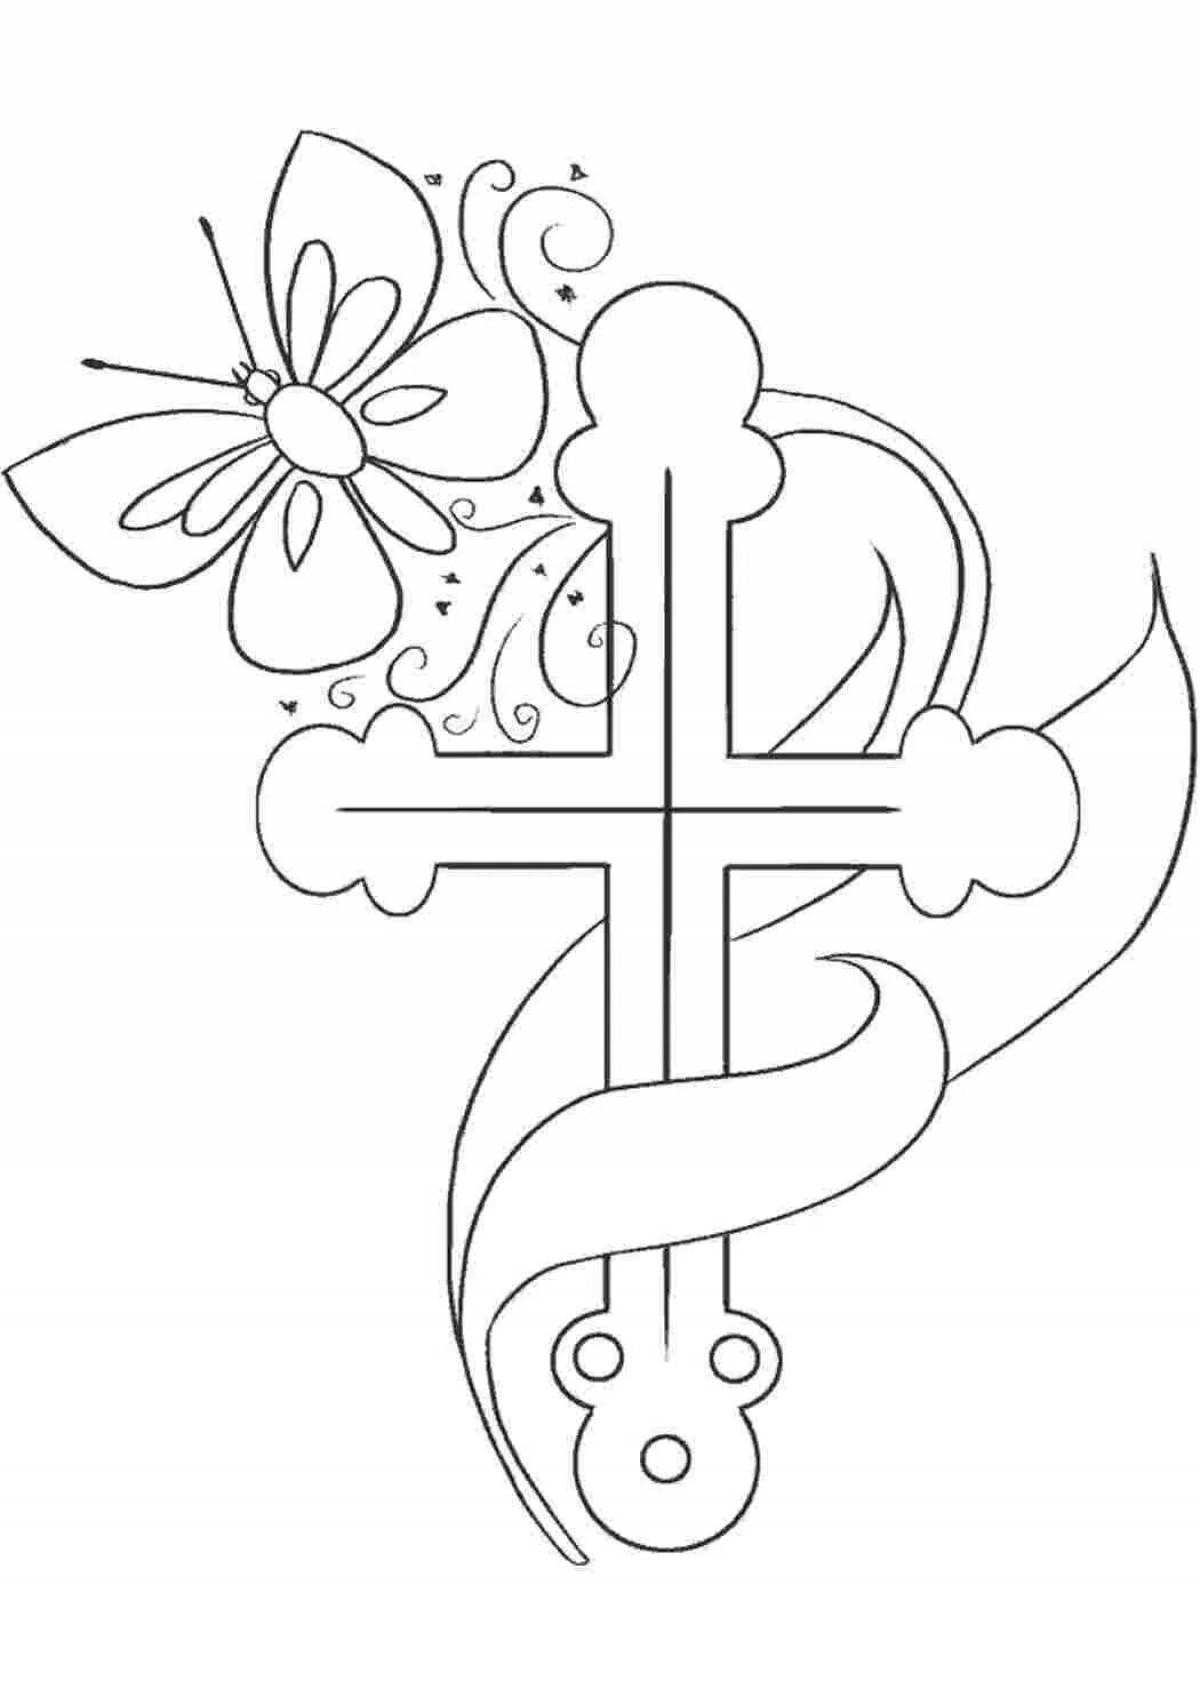 Coloring book shining cross for children